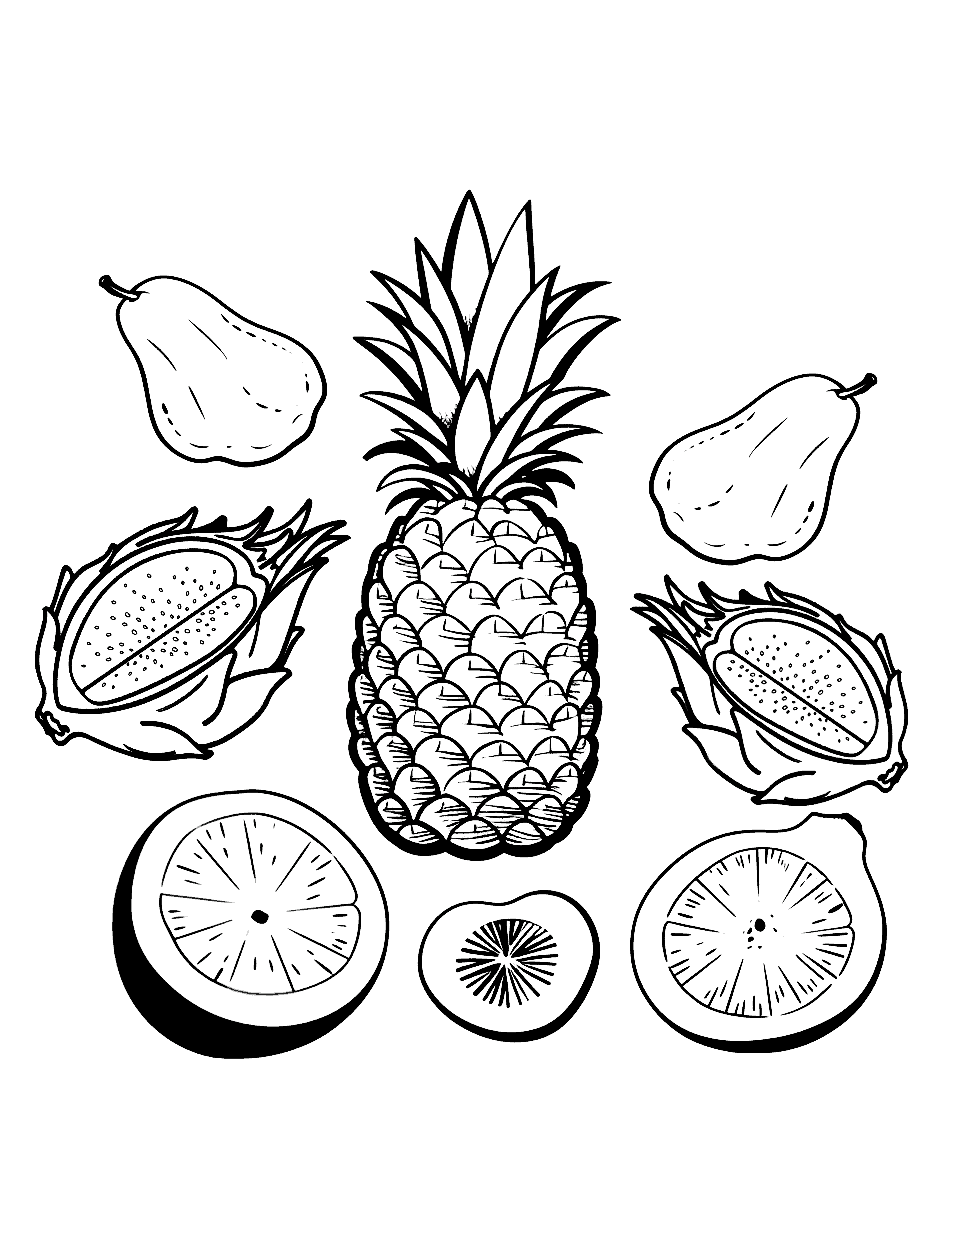 Tropical Fruit Collection Coloring Page - An assortment of tropical fruits like kiwi, dragon fruit, and papaya.